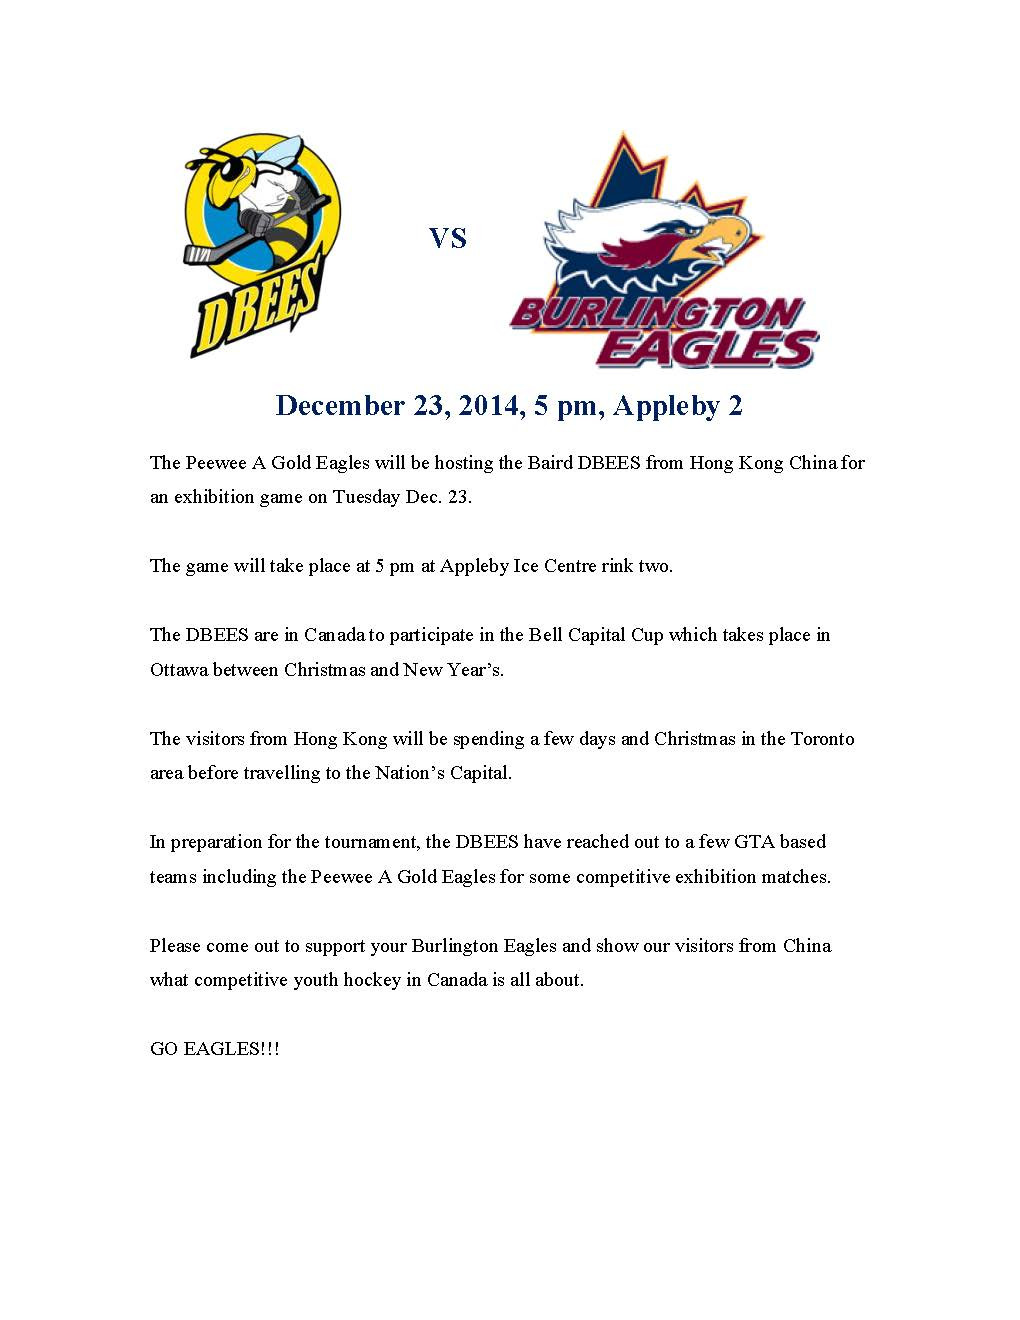 The_Peewee_A_Gold_Eagles_will_be_hosting_the_Baird_DBEES_from_Hong_Kong_China_for_an_exhibition_game_on_Tuesday_Dec.jpg